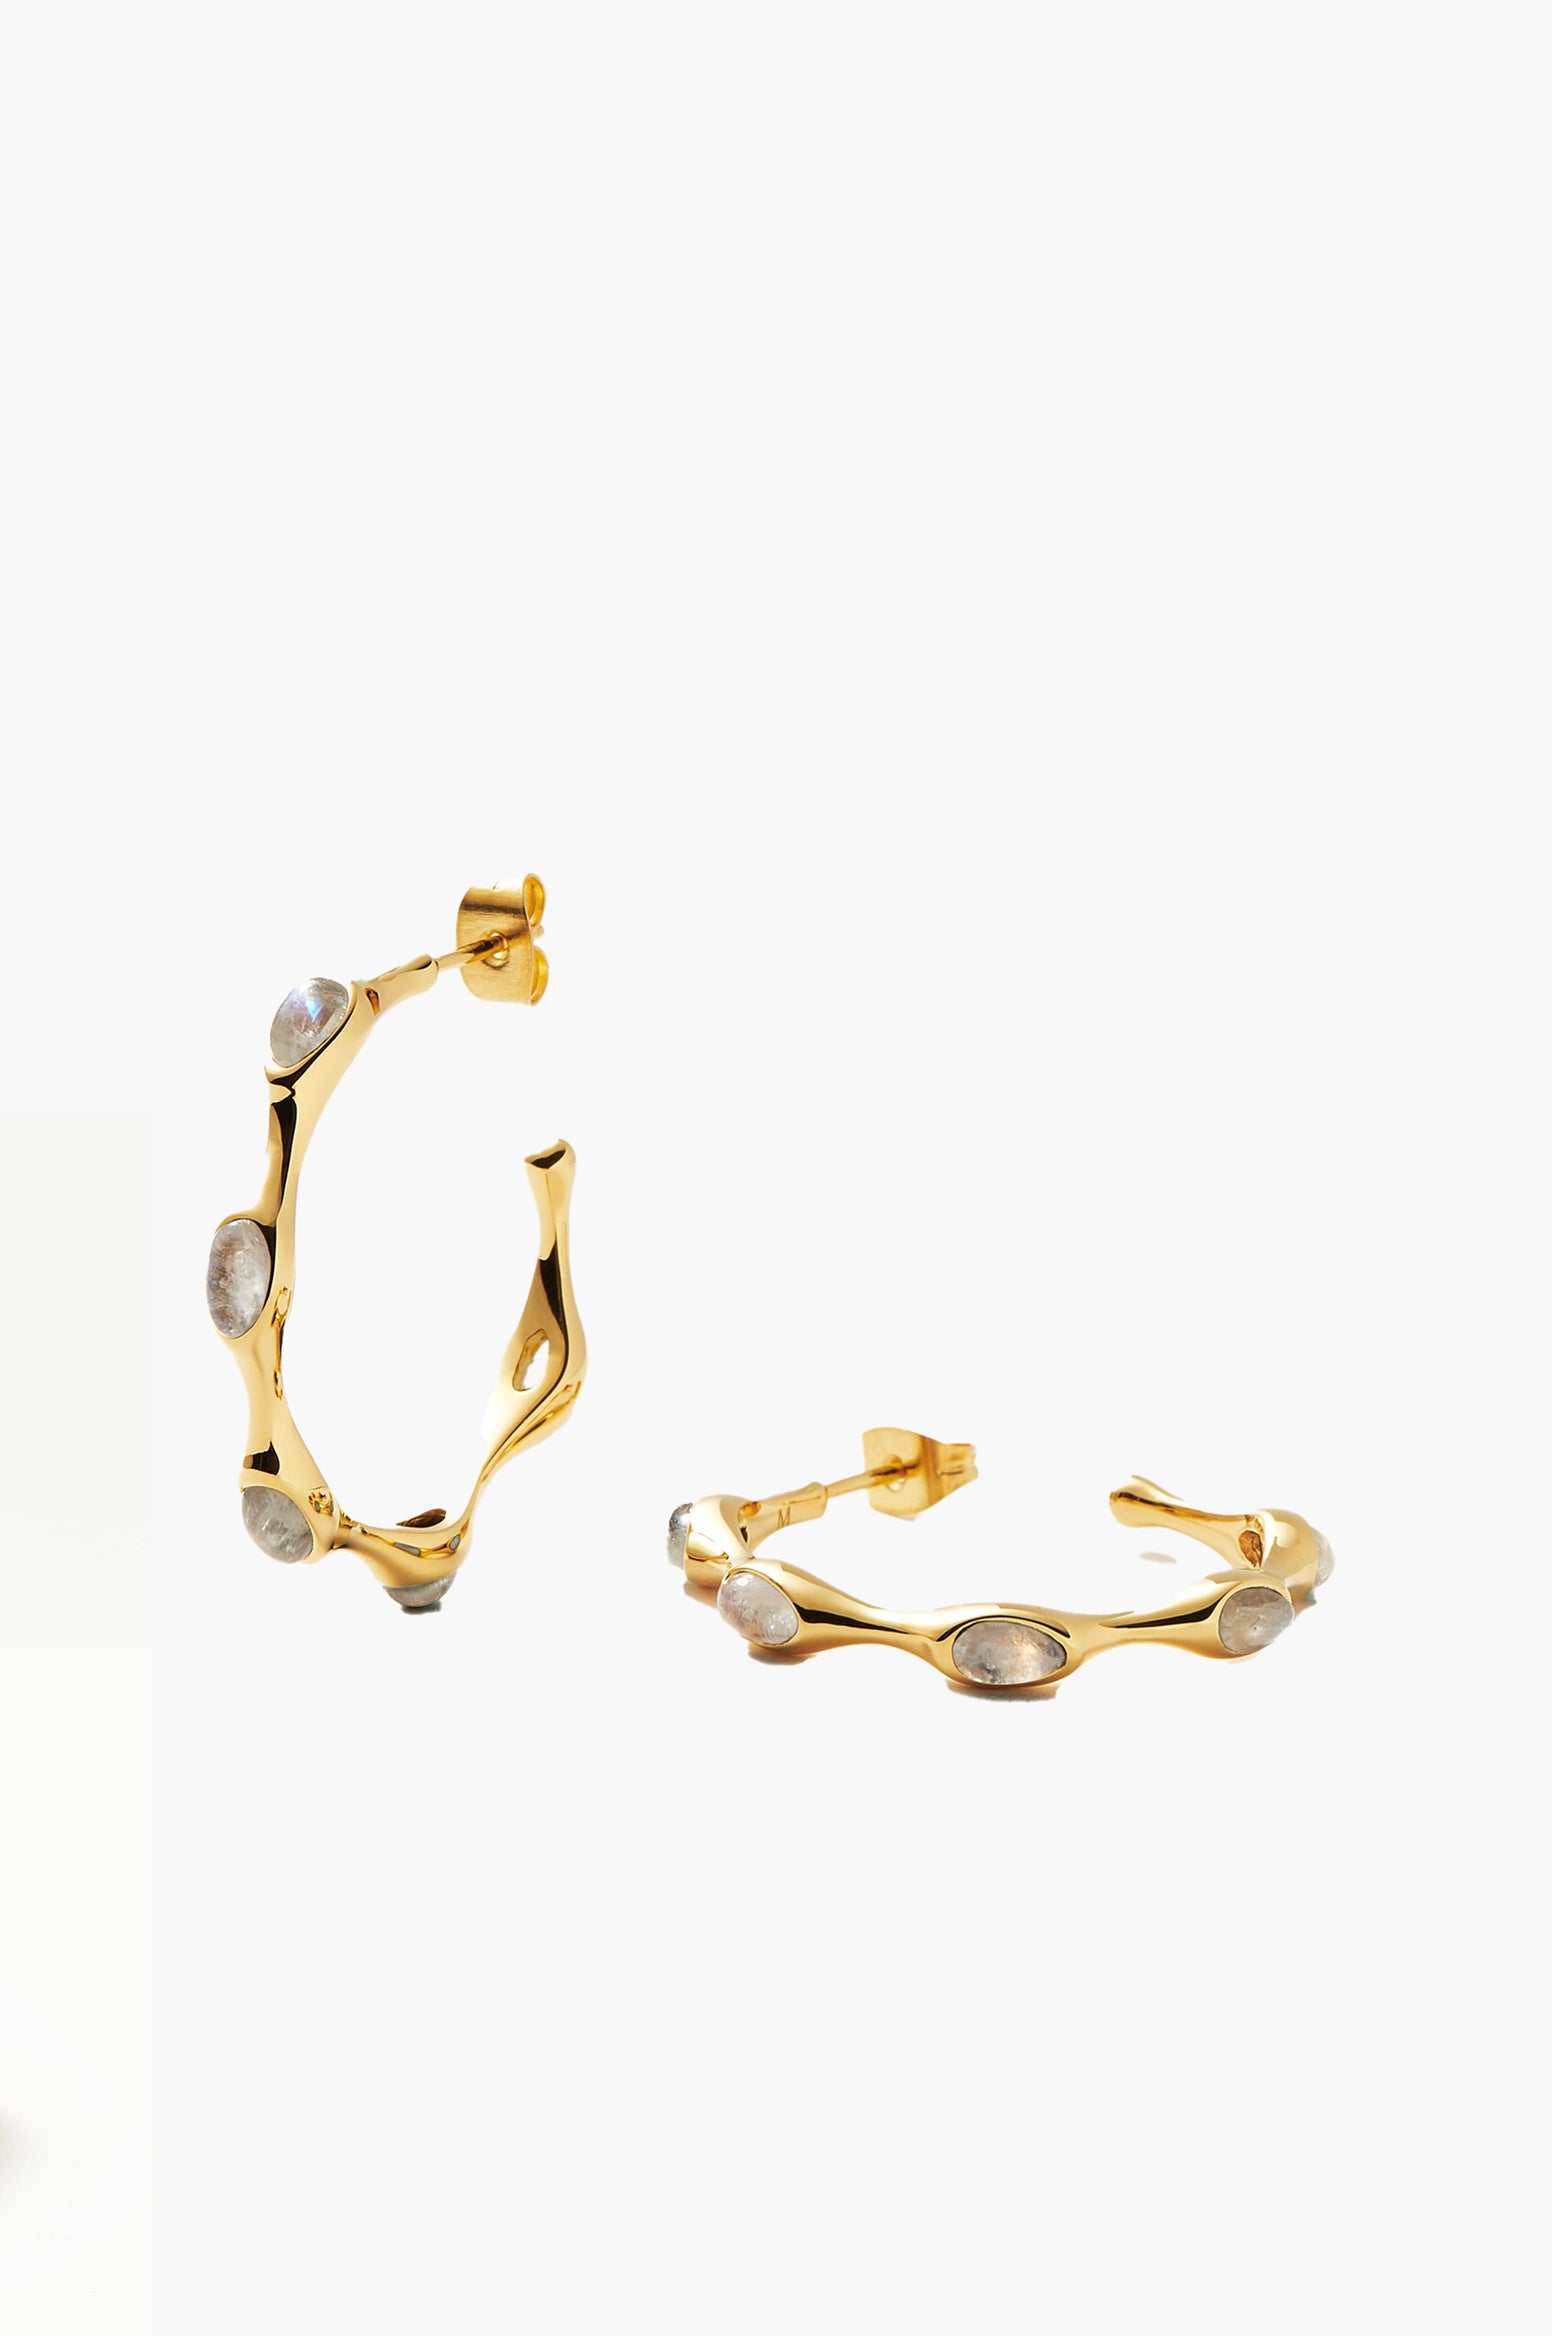 The MISSOMA Magma Gemstone Small Hoop Earrings in Gold available at The New Trend.